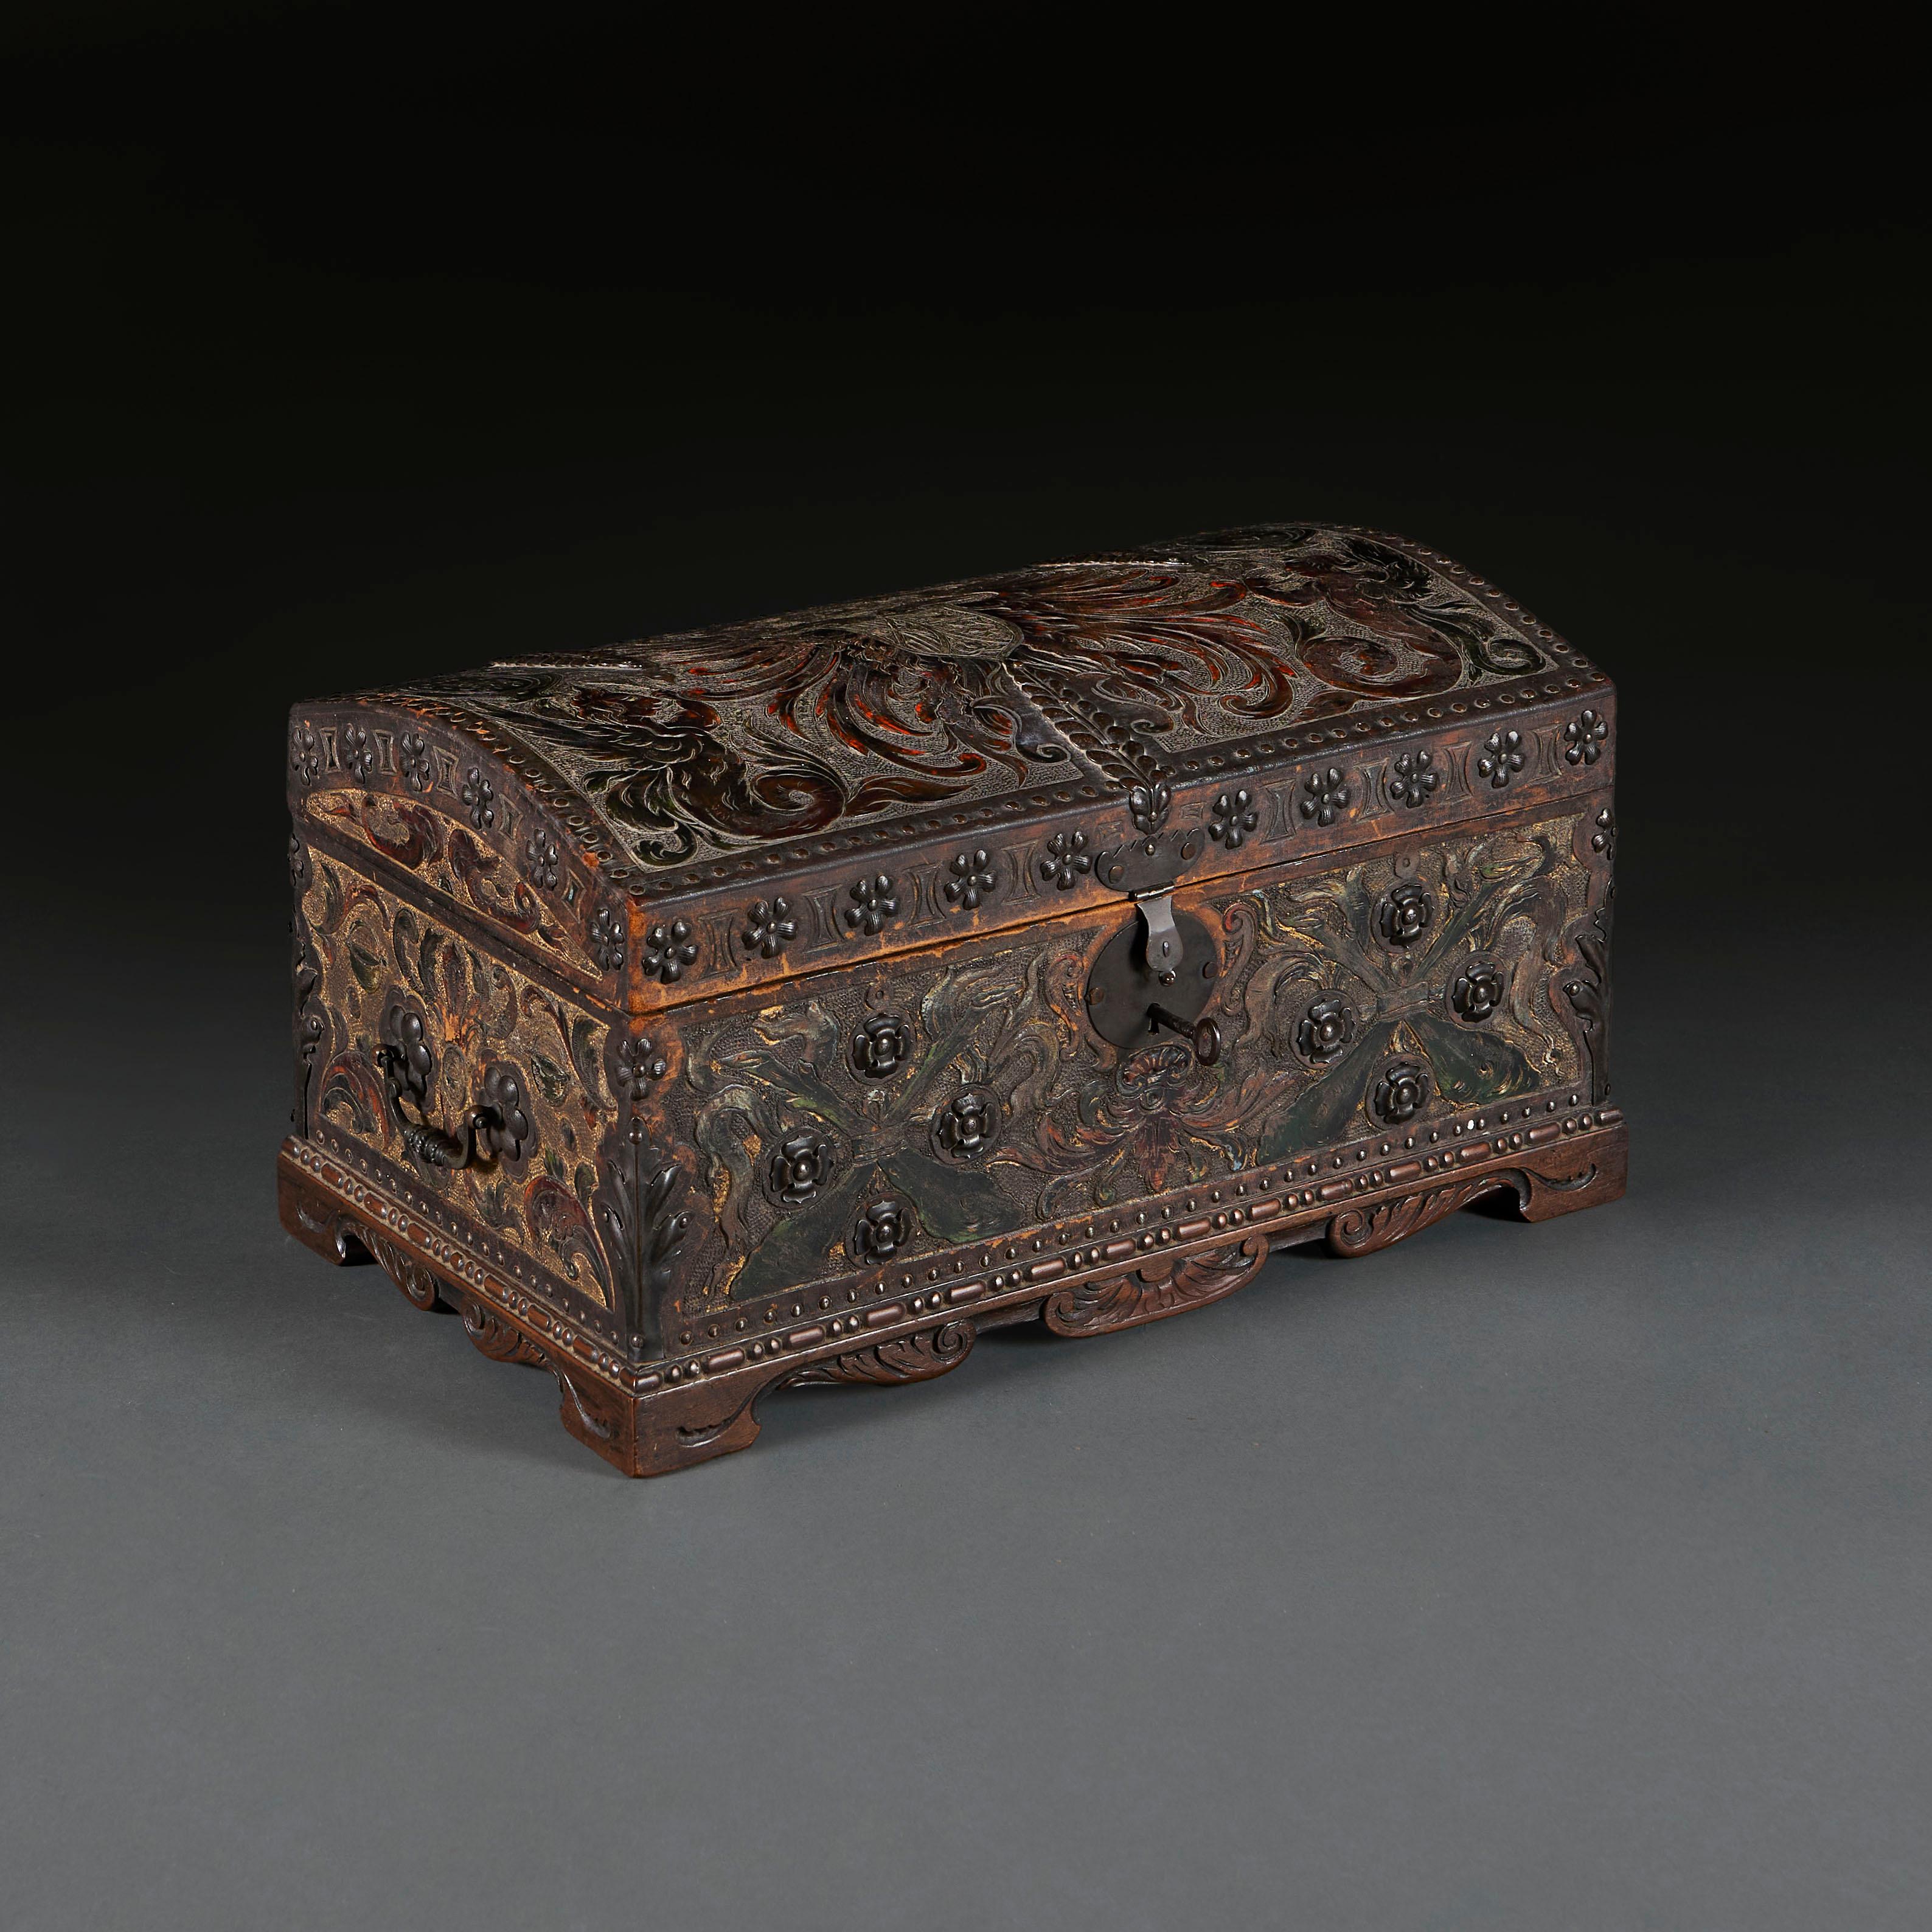 Spain, 1890

A late nineteenth century Spanish wood and leather casket with foliate tooling throughout, the domed top depicting the Greek figures Scylla and Charybdis, the borders lined with iron flowerhead studs and the sides with bail pull